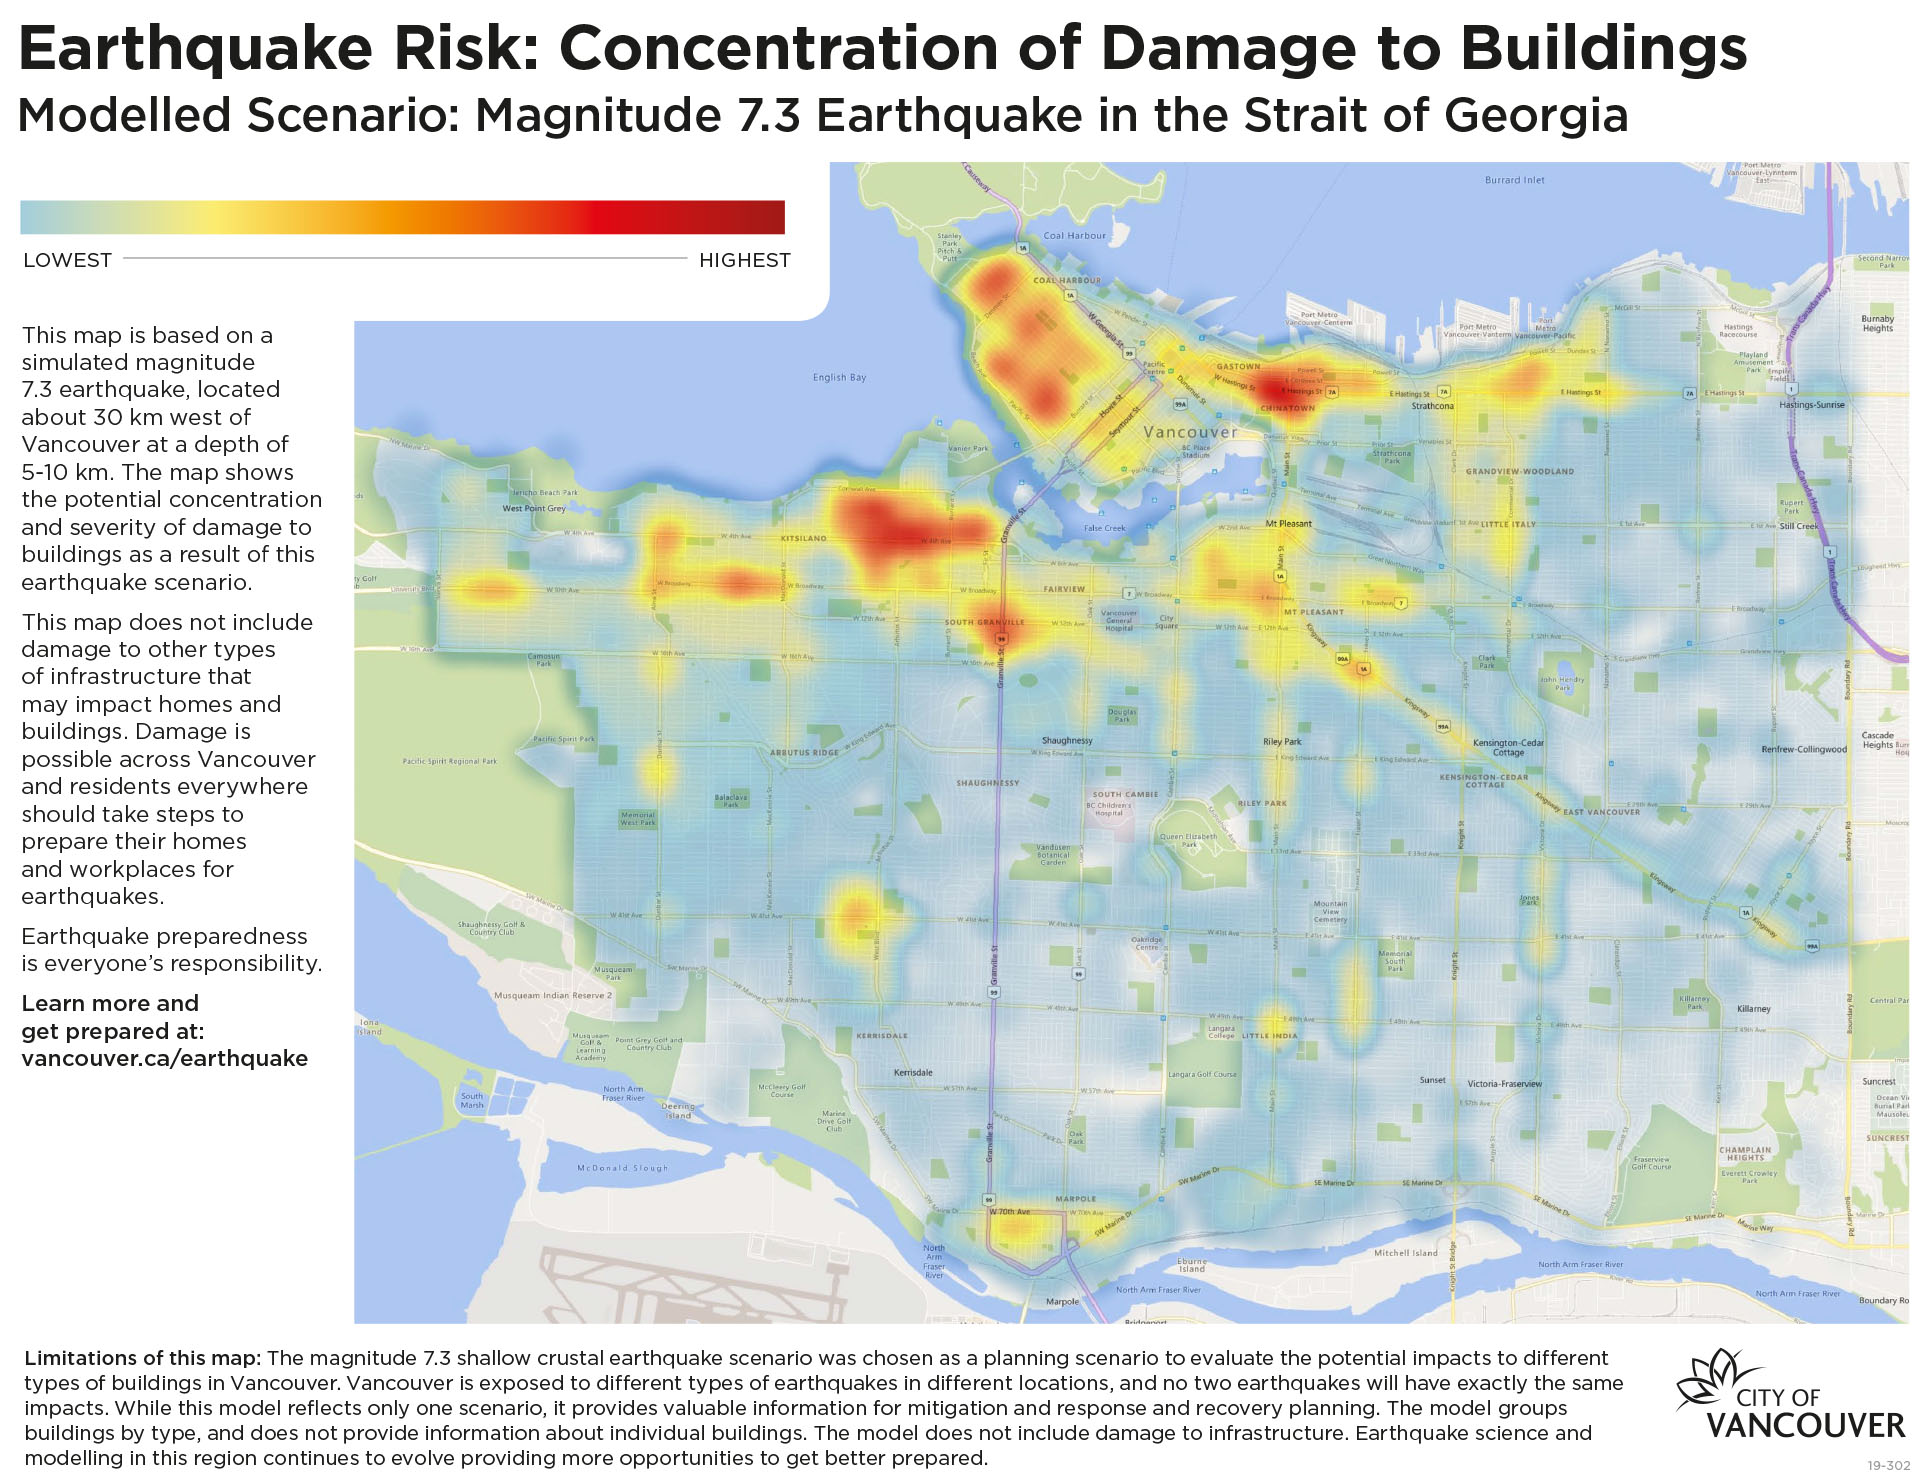 VANCOUVER EARTHQUAKE RISK MAP